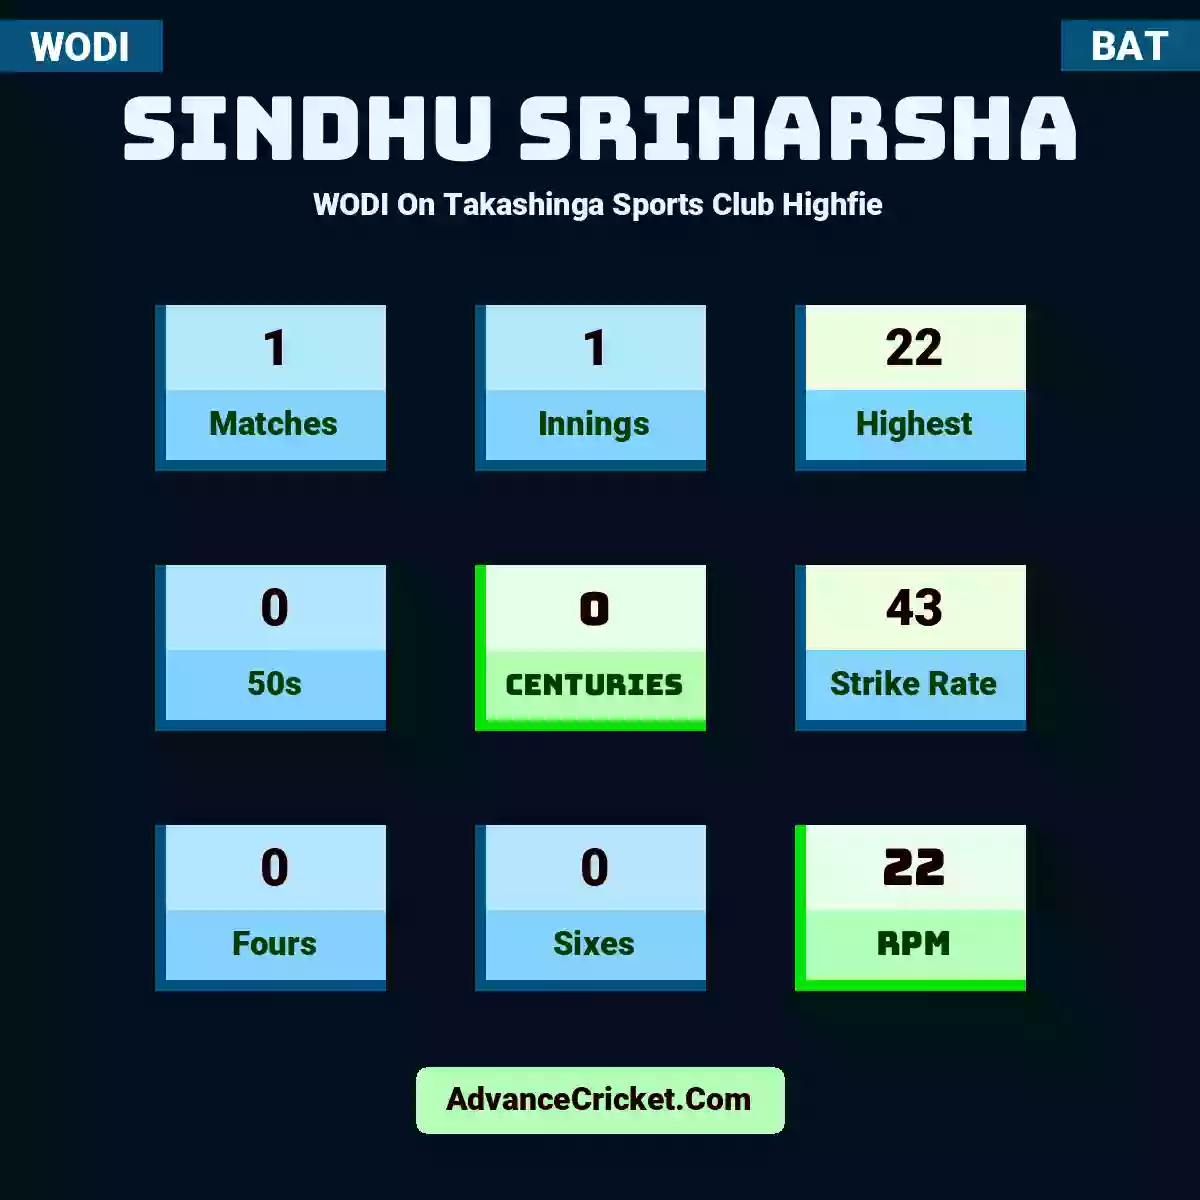 Sindhu Sriharsha WODI  On Takashinga Sports Club Highfie, Sindhu Sriharsha played 1 matches, scored 22 runs as highest, 0 half-centuries, and 0 centuries, with a strike rate of 43. S.Sriharsha hit 0 fours and 0 sixes, with an RPM of 22.